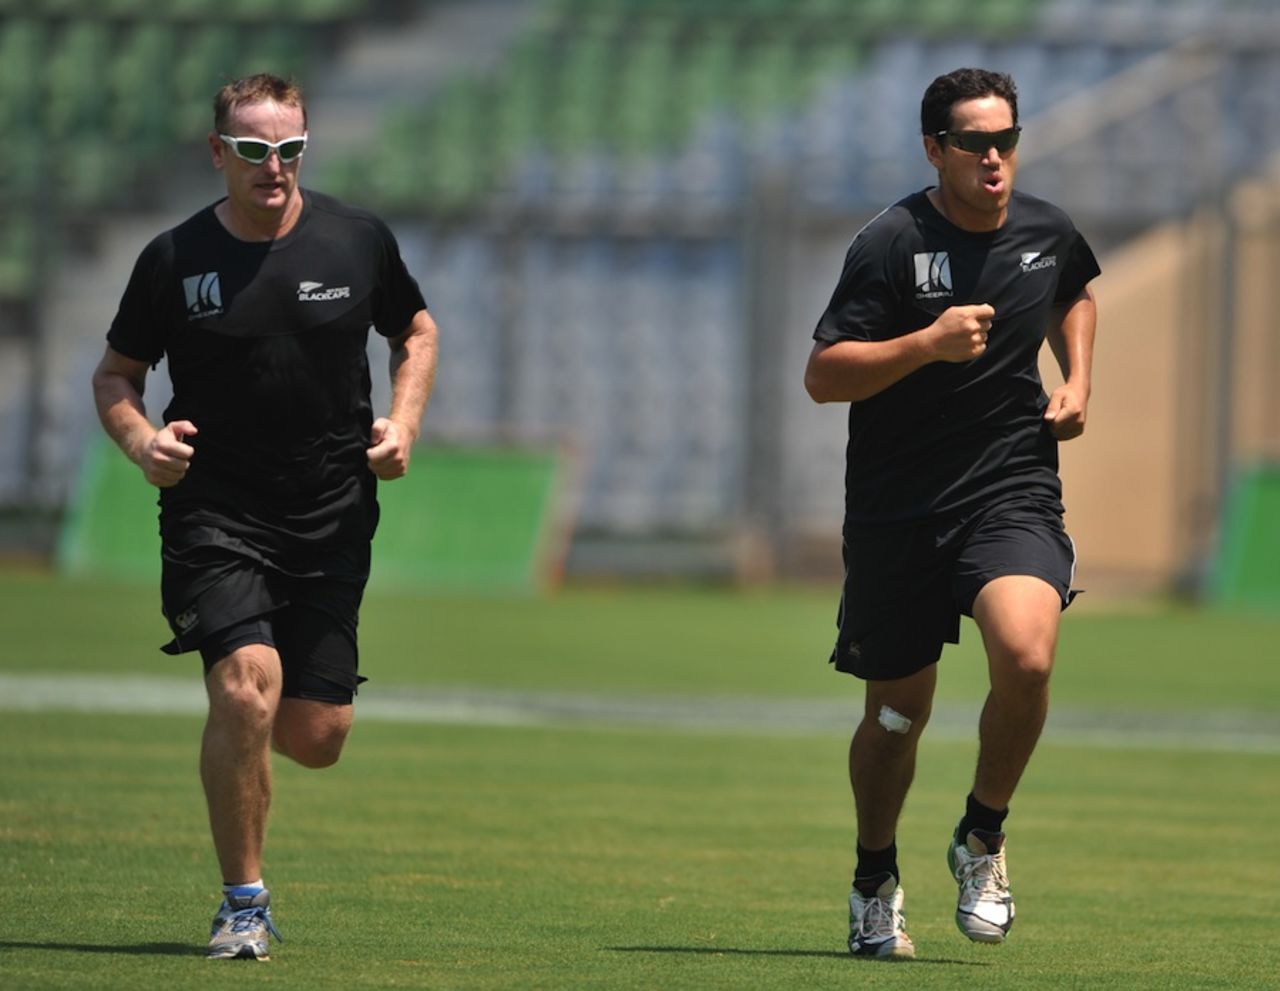 Scott Styris and Ross Taylor go for a run, World Cup, Mumbai, March 20, 2011